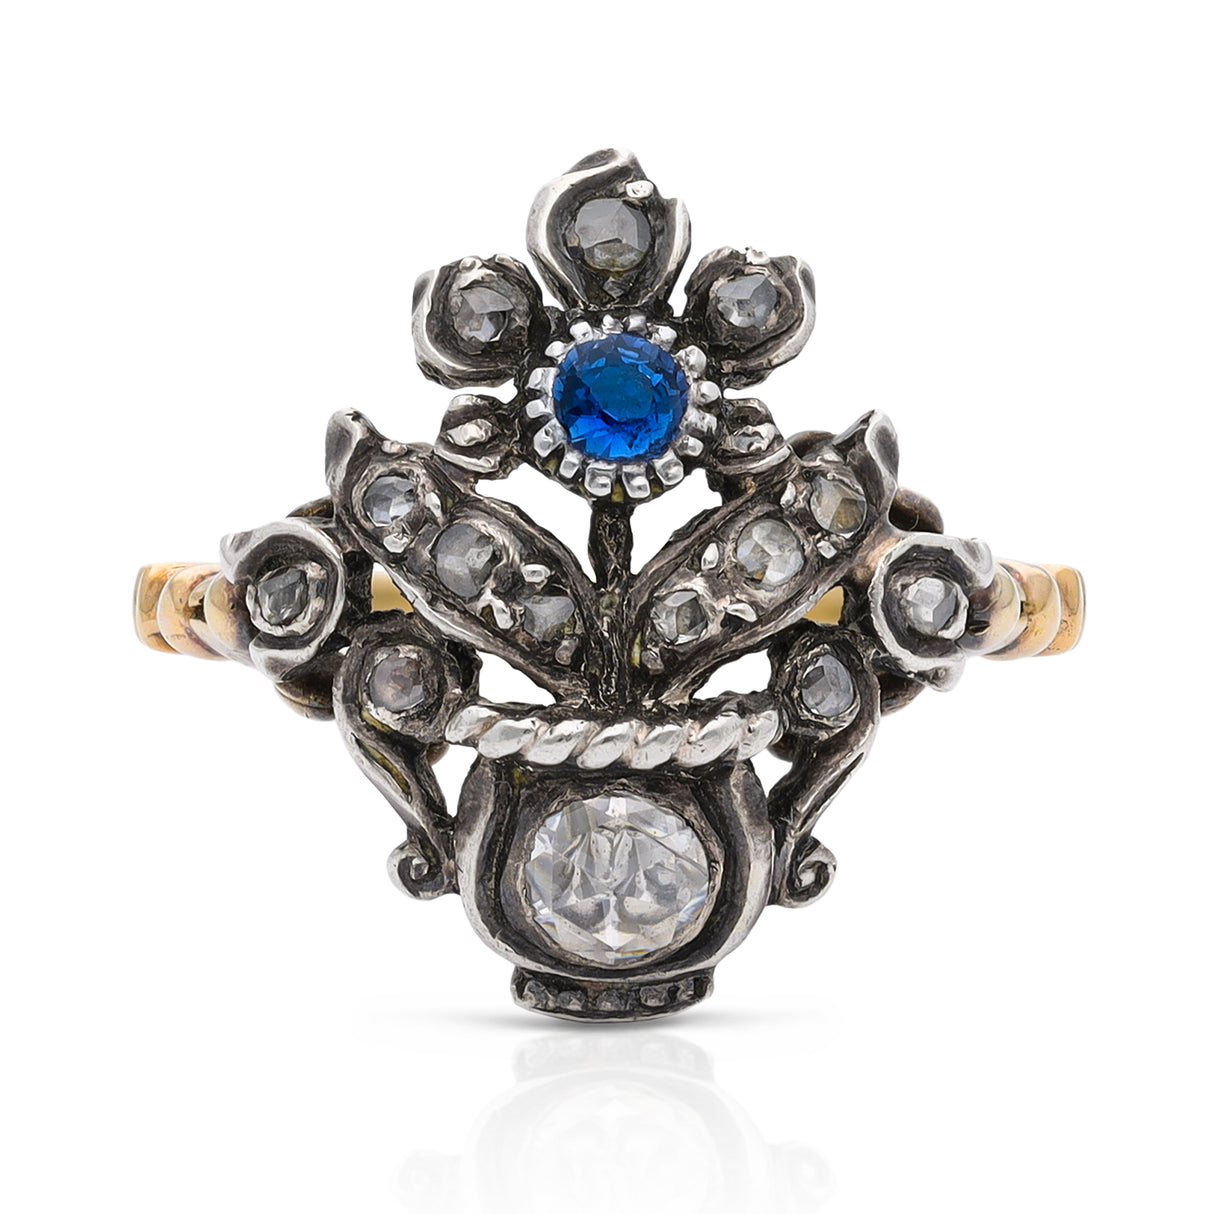 Antique Giardinetti sapphire ring, front view.